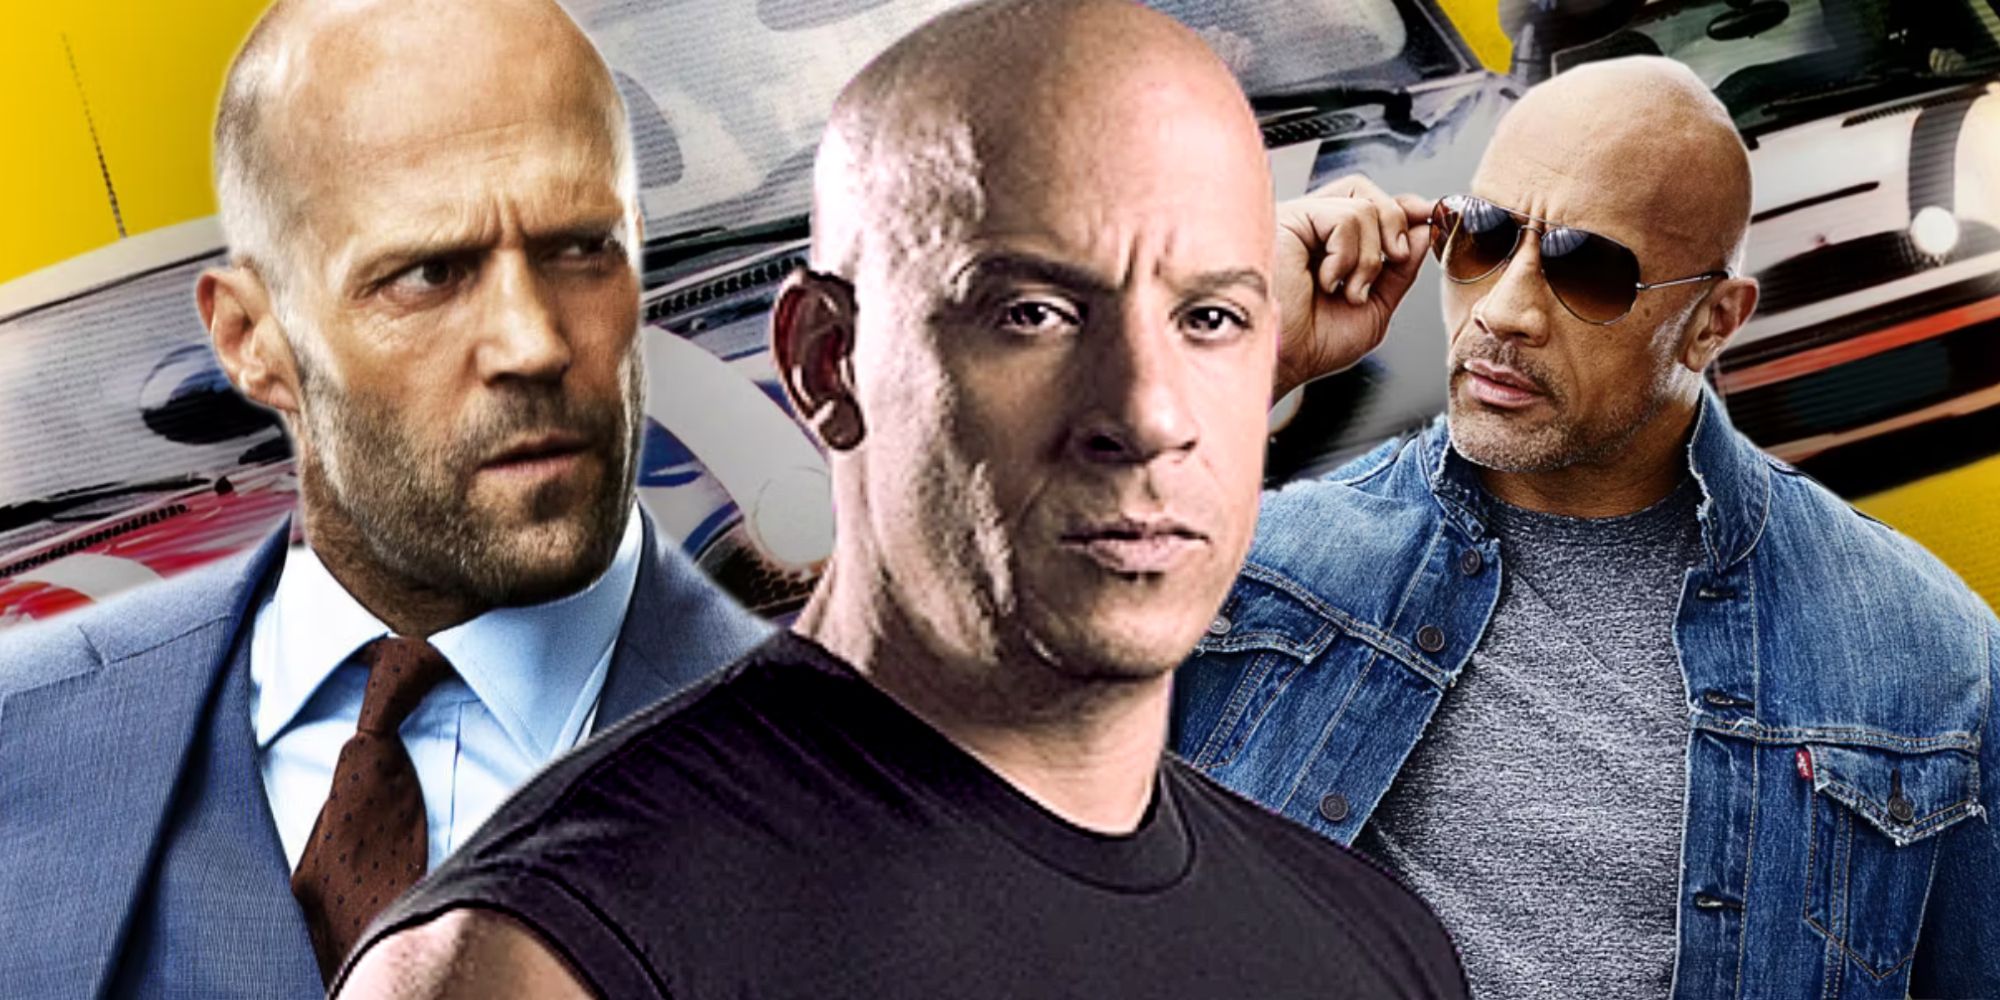 Dominic Toretto, Hobbs, and Shaw in The Fast and Furious Saga